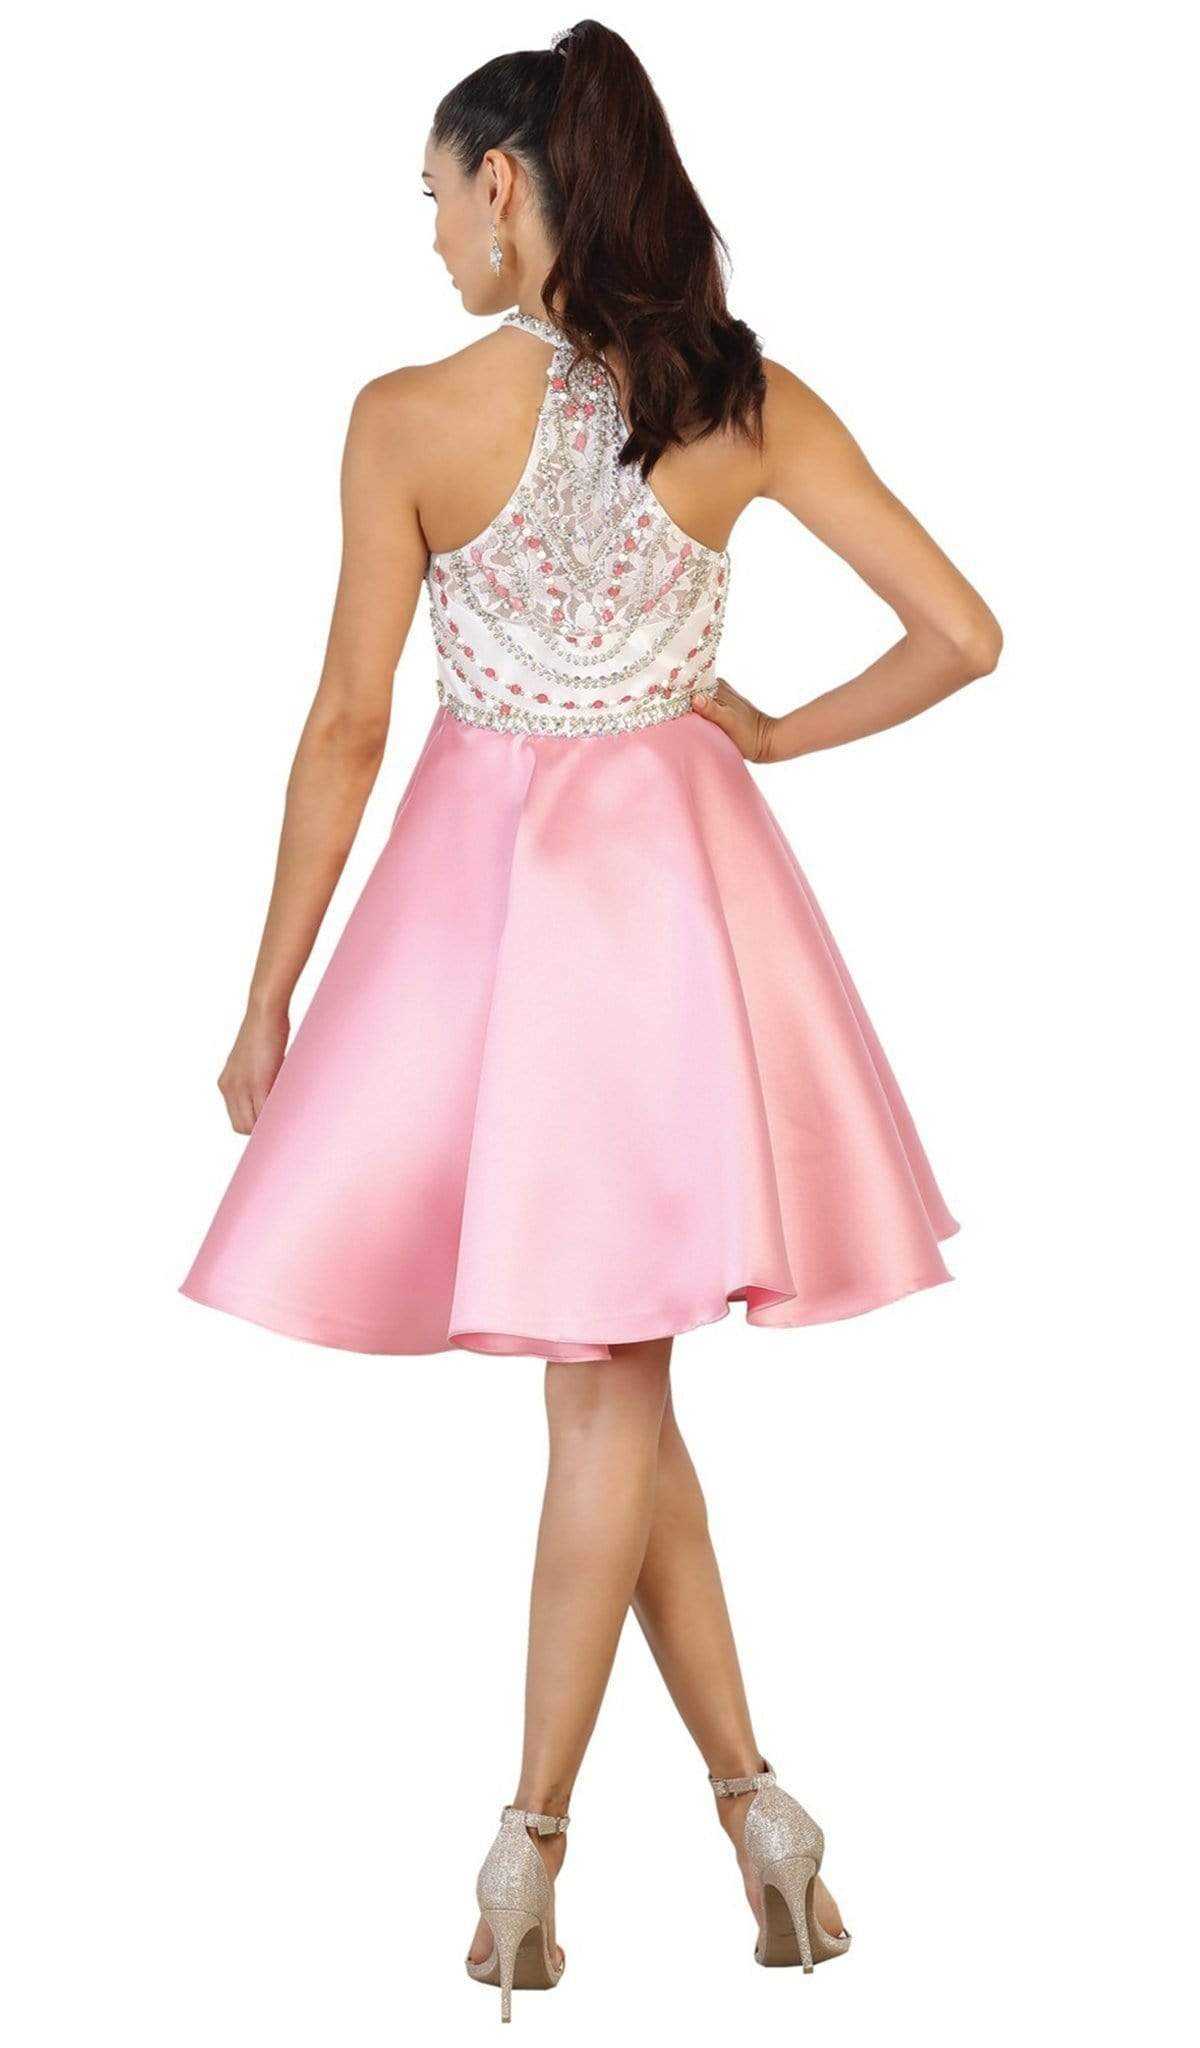 May Queen, May Queen - Bejeweled Halter Neck Cocktail Dress MQ1492 - 1 pc Pink In Size 4 Available